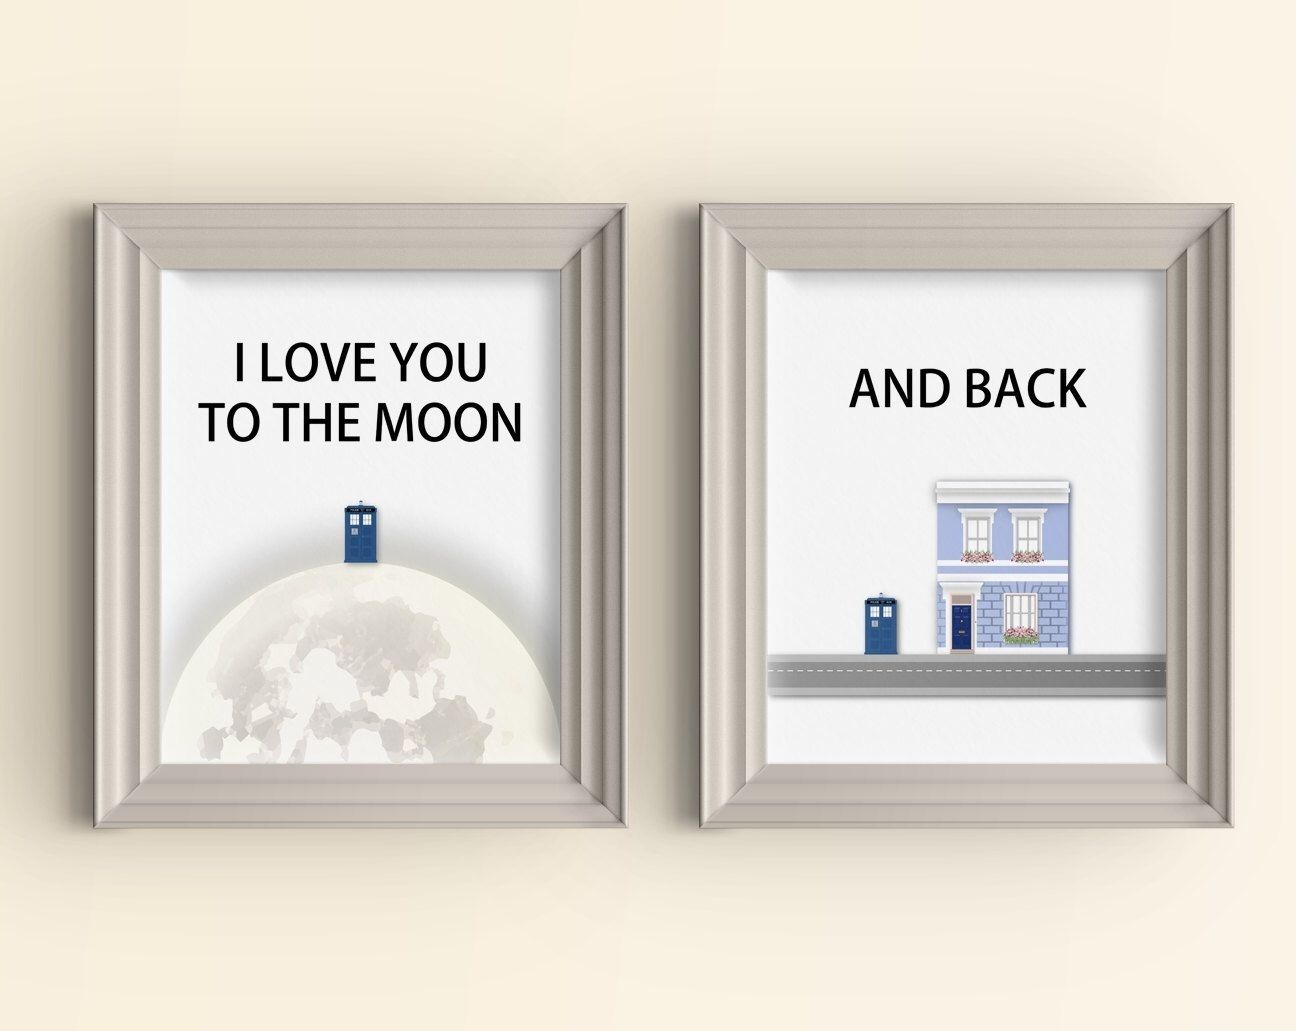 Doctor Who Baby Art, Doctor Who Gift, Doctor Who Art, Dr Who Fan Within Doctor Who Wall Art (View 5 of 20)